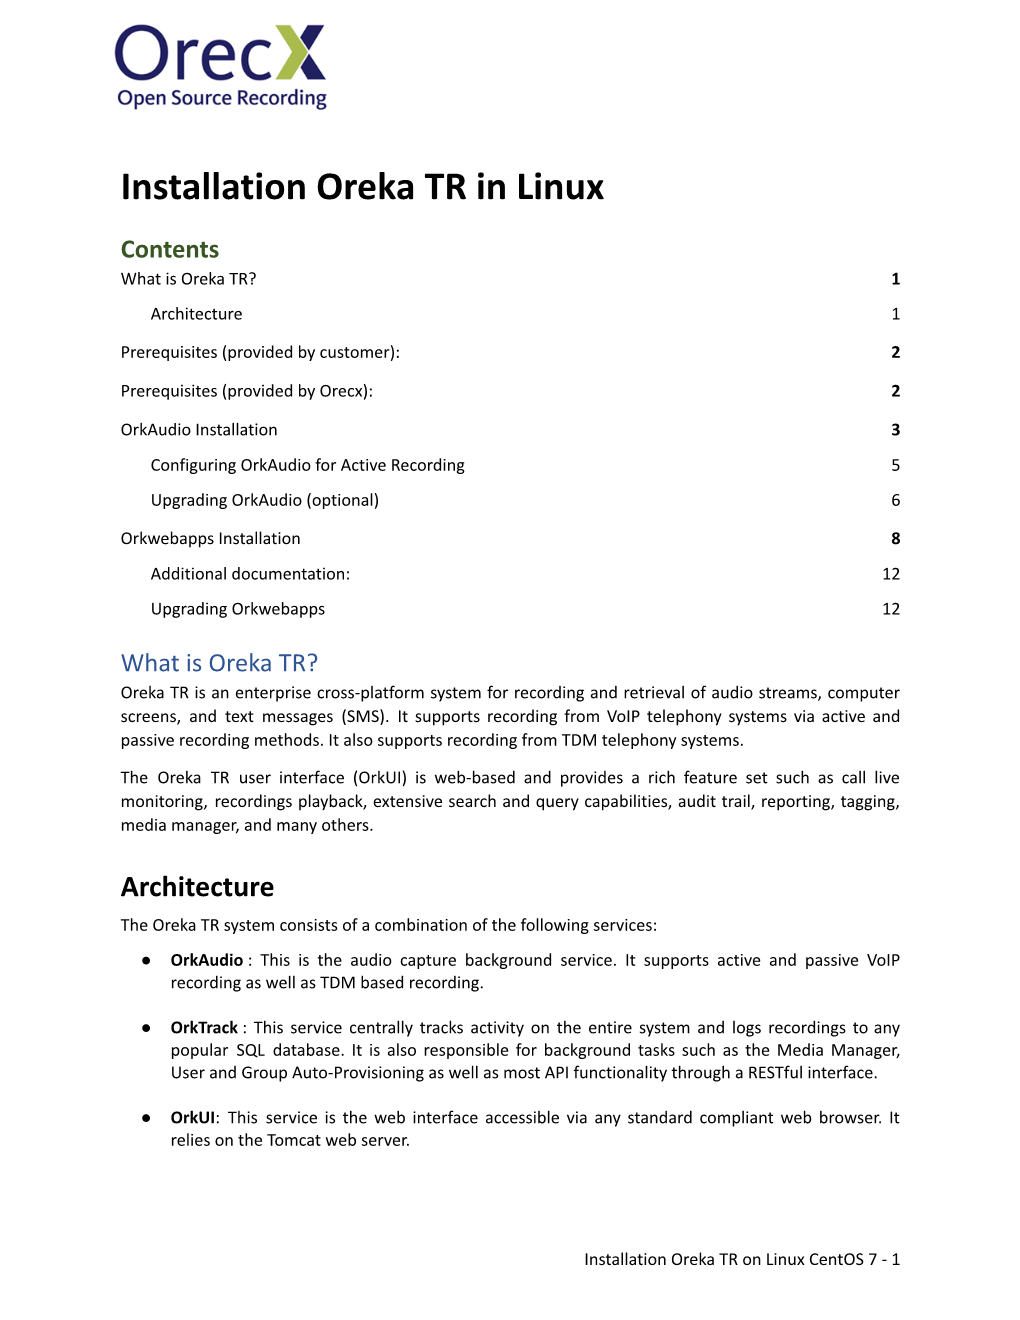 Installation Oreka TR on Linux Centos 7 - 1 Prerequisites (Provided by Customer)